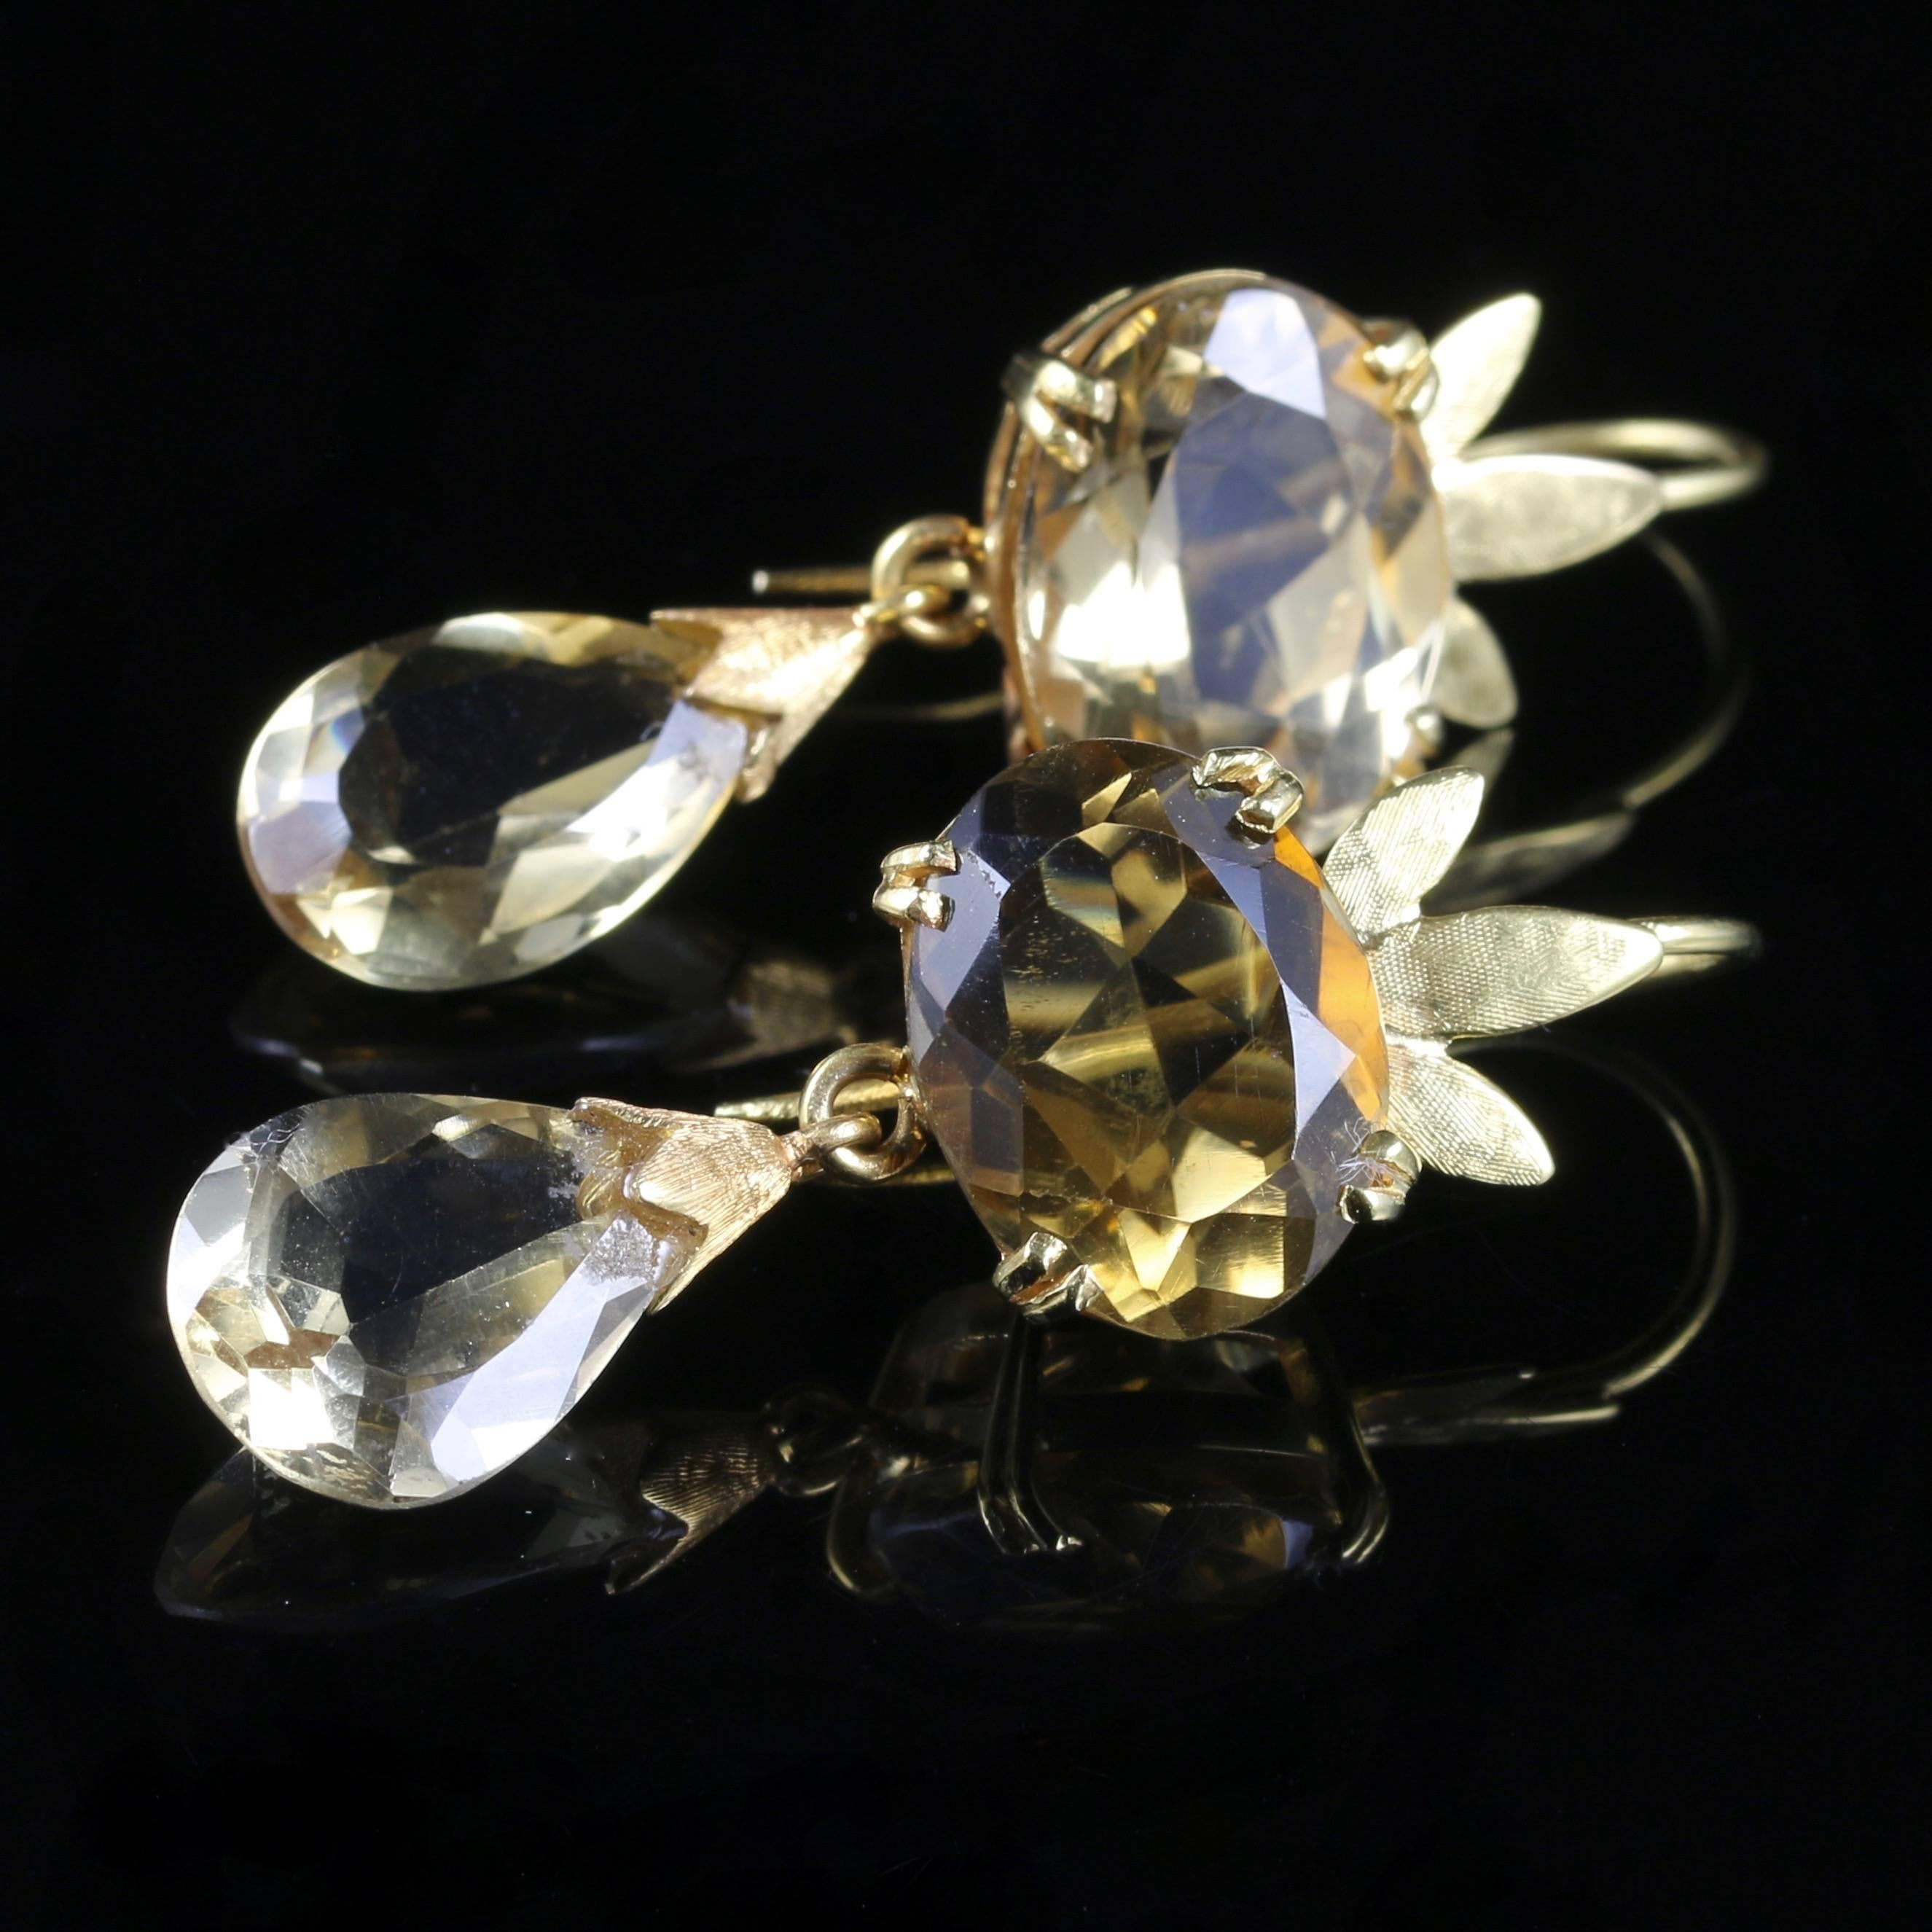 These very beautiful Victorian earrings are Scottish depicting the Scottish thistle and set with fabulous Citrines. 

The earrings are set in 18ct solid Yellow Gold. 

Circa 1900 

The top Citrine is 8ct each leading to a bottom citrine pendant